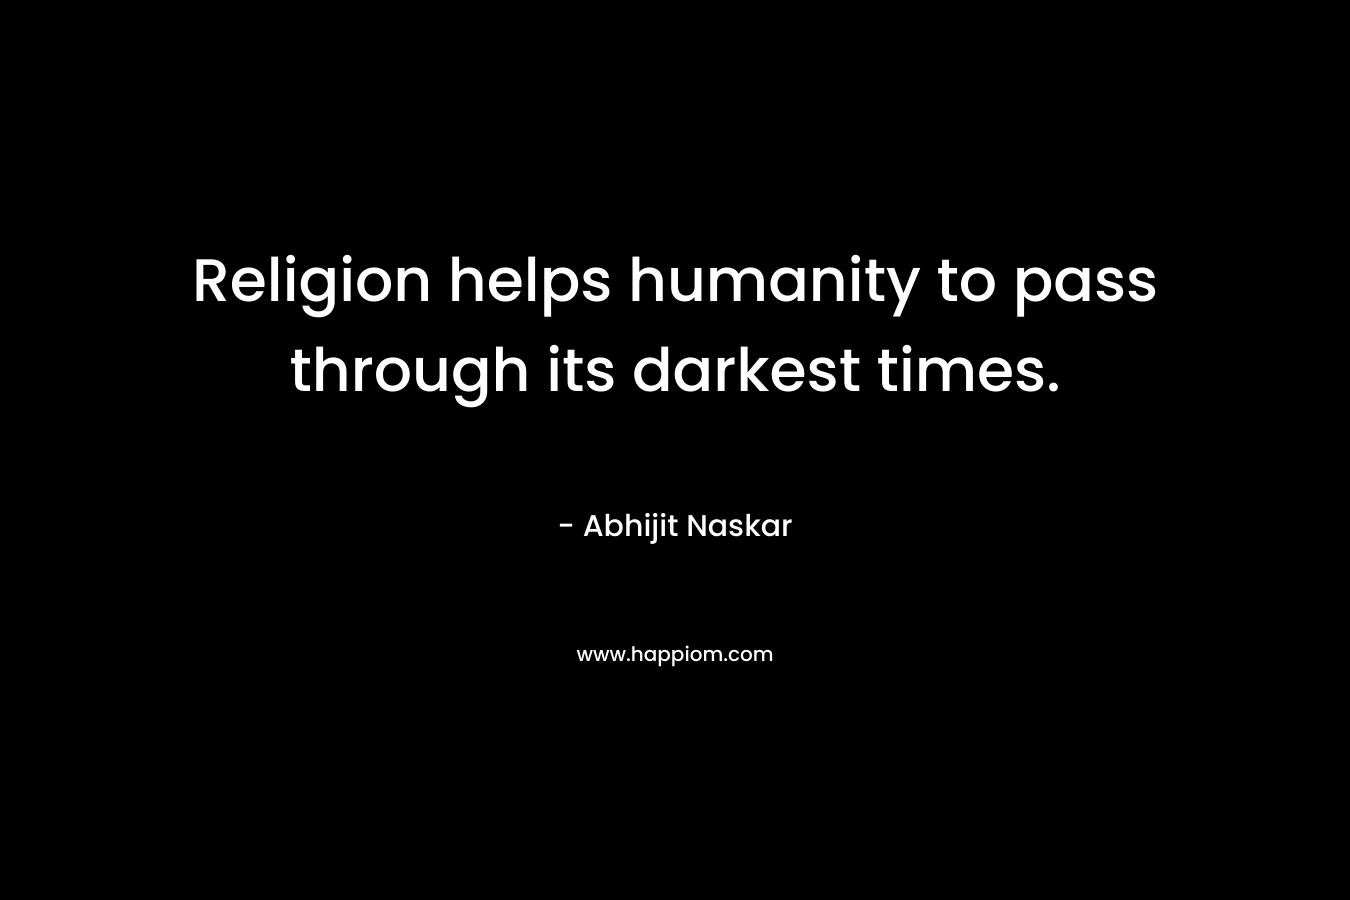 Religion helps humanity to pass through its darkest times.